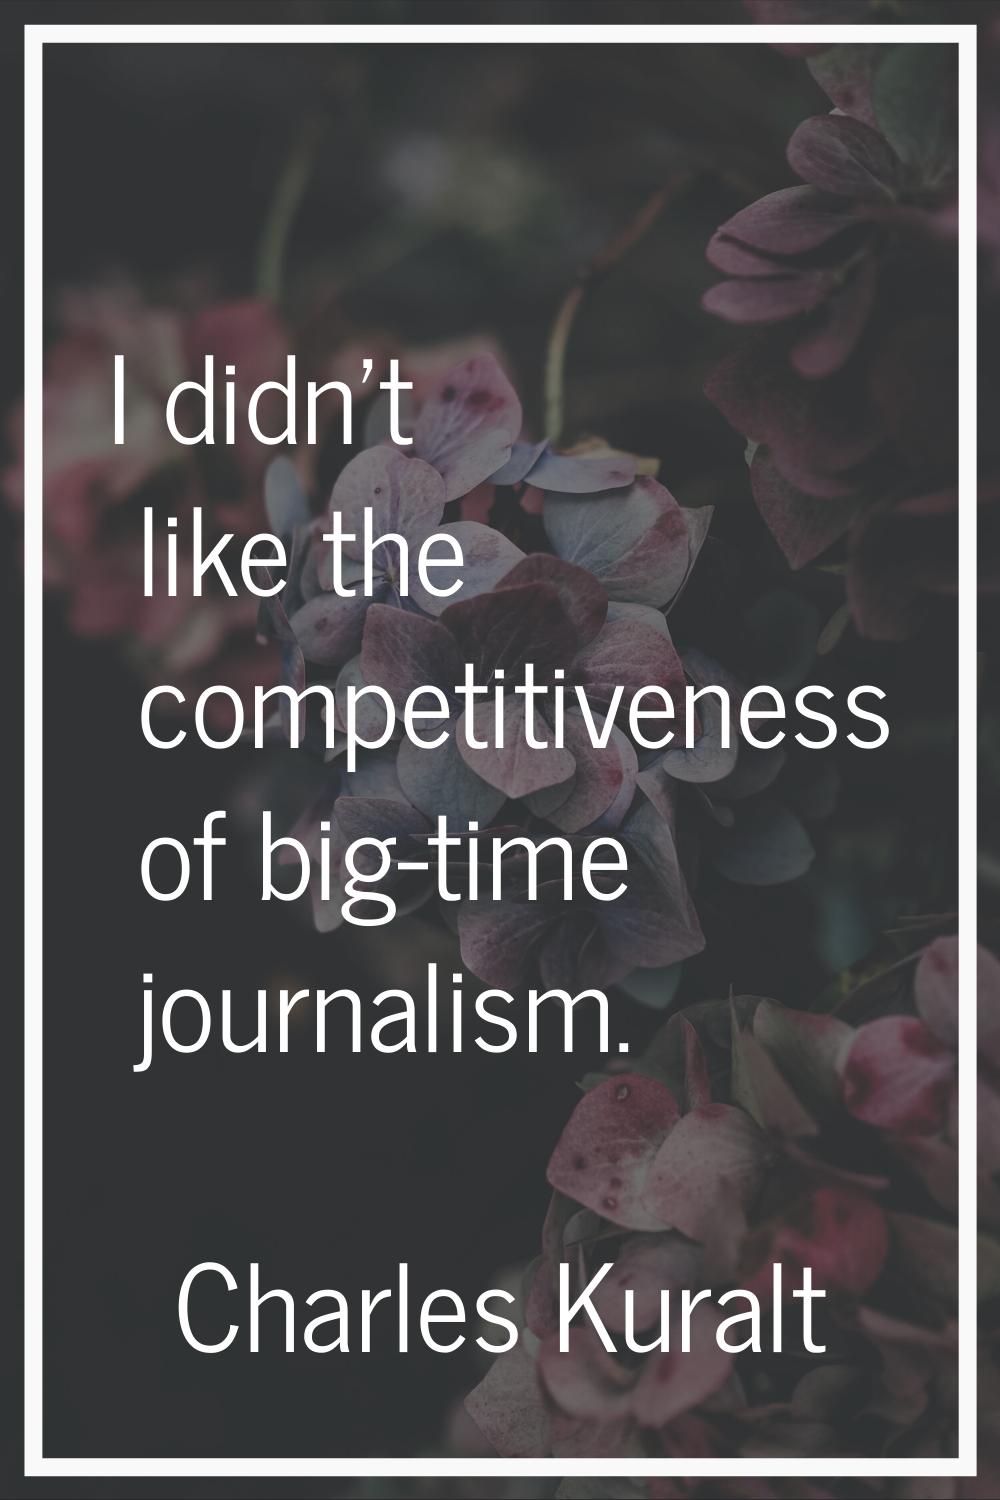 I didn't like the competitiveness of big-time journalism.